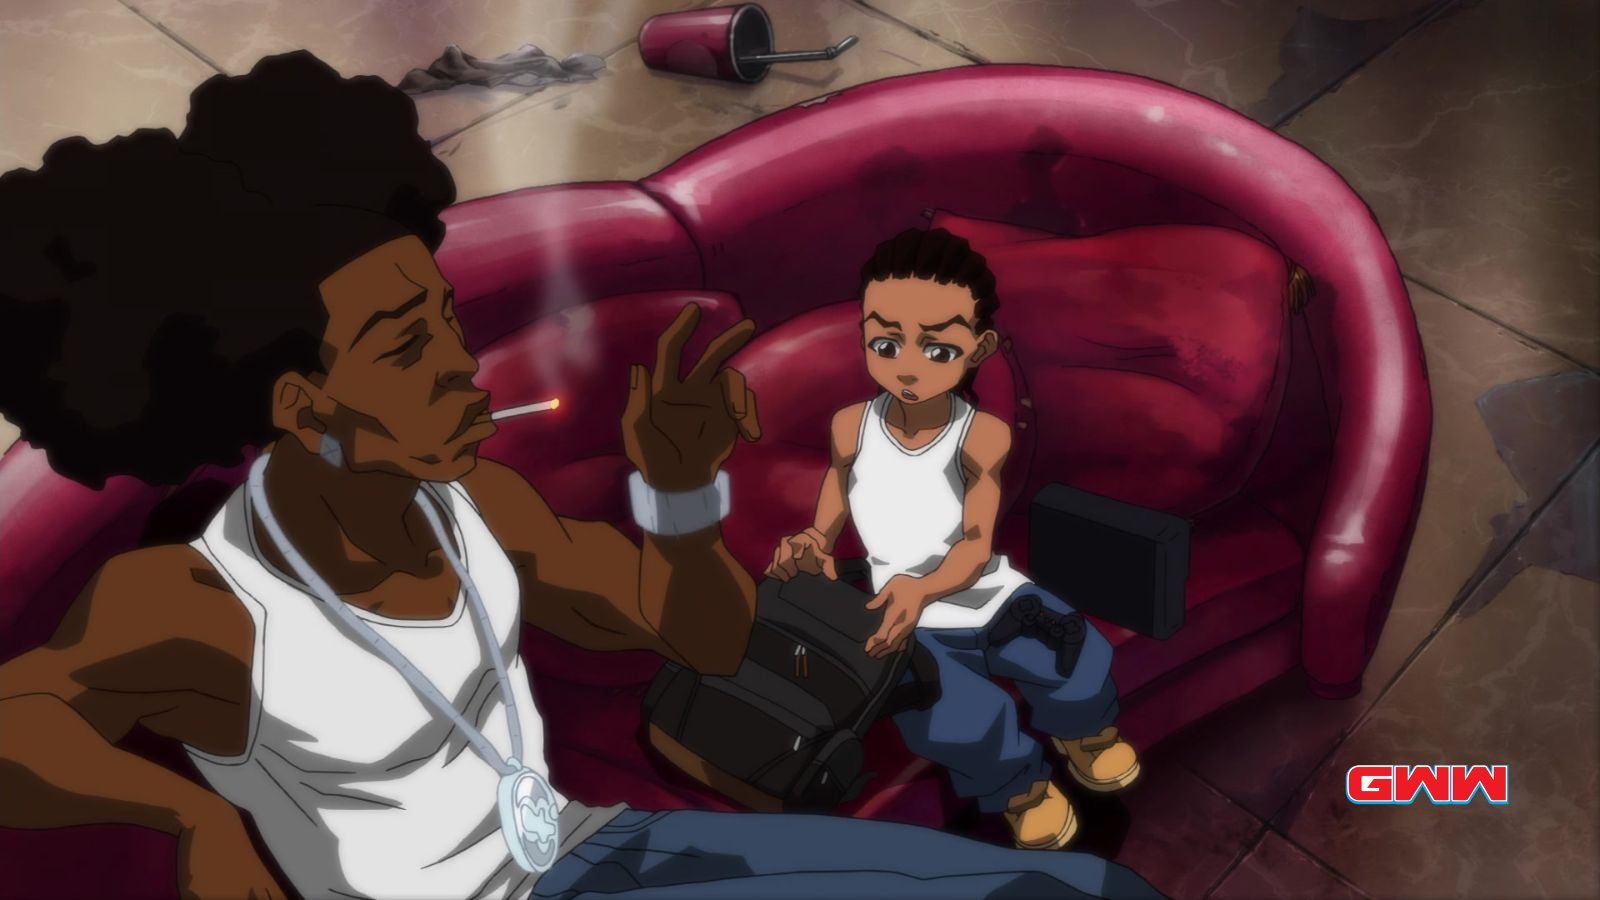 Riley talking to an older guy, is Boondocks an anime